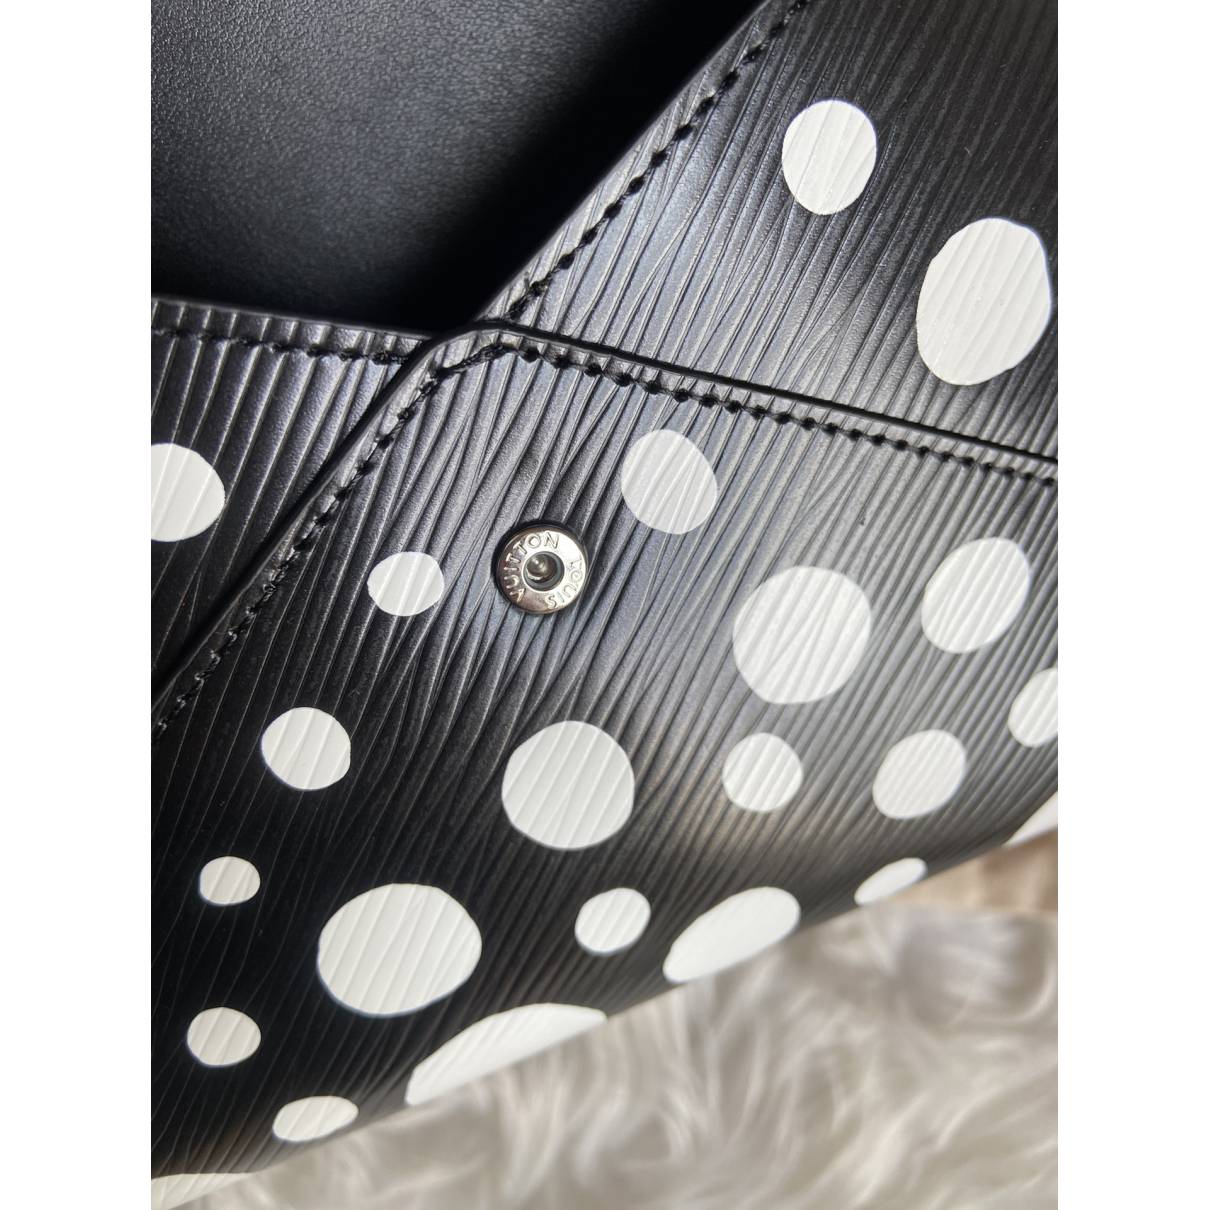 Louis Vuitton - Authenticated Kirigami Clutch Bag - Leather Black Polkadot For Woman, Never Worn